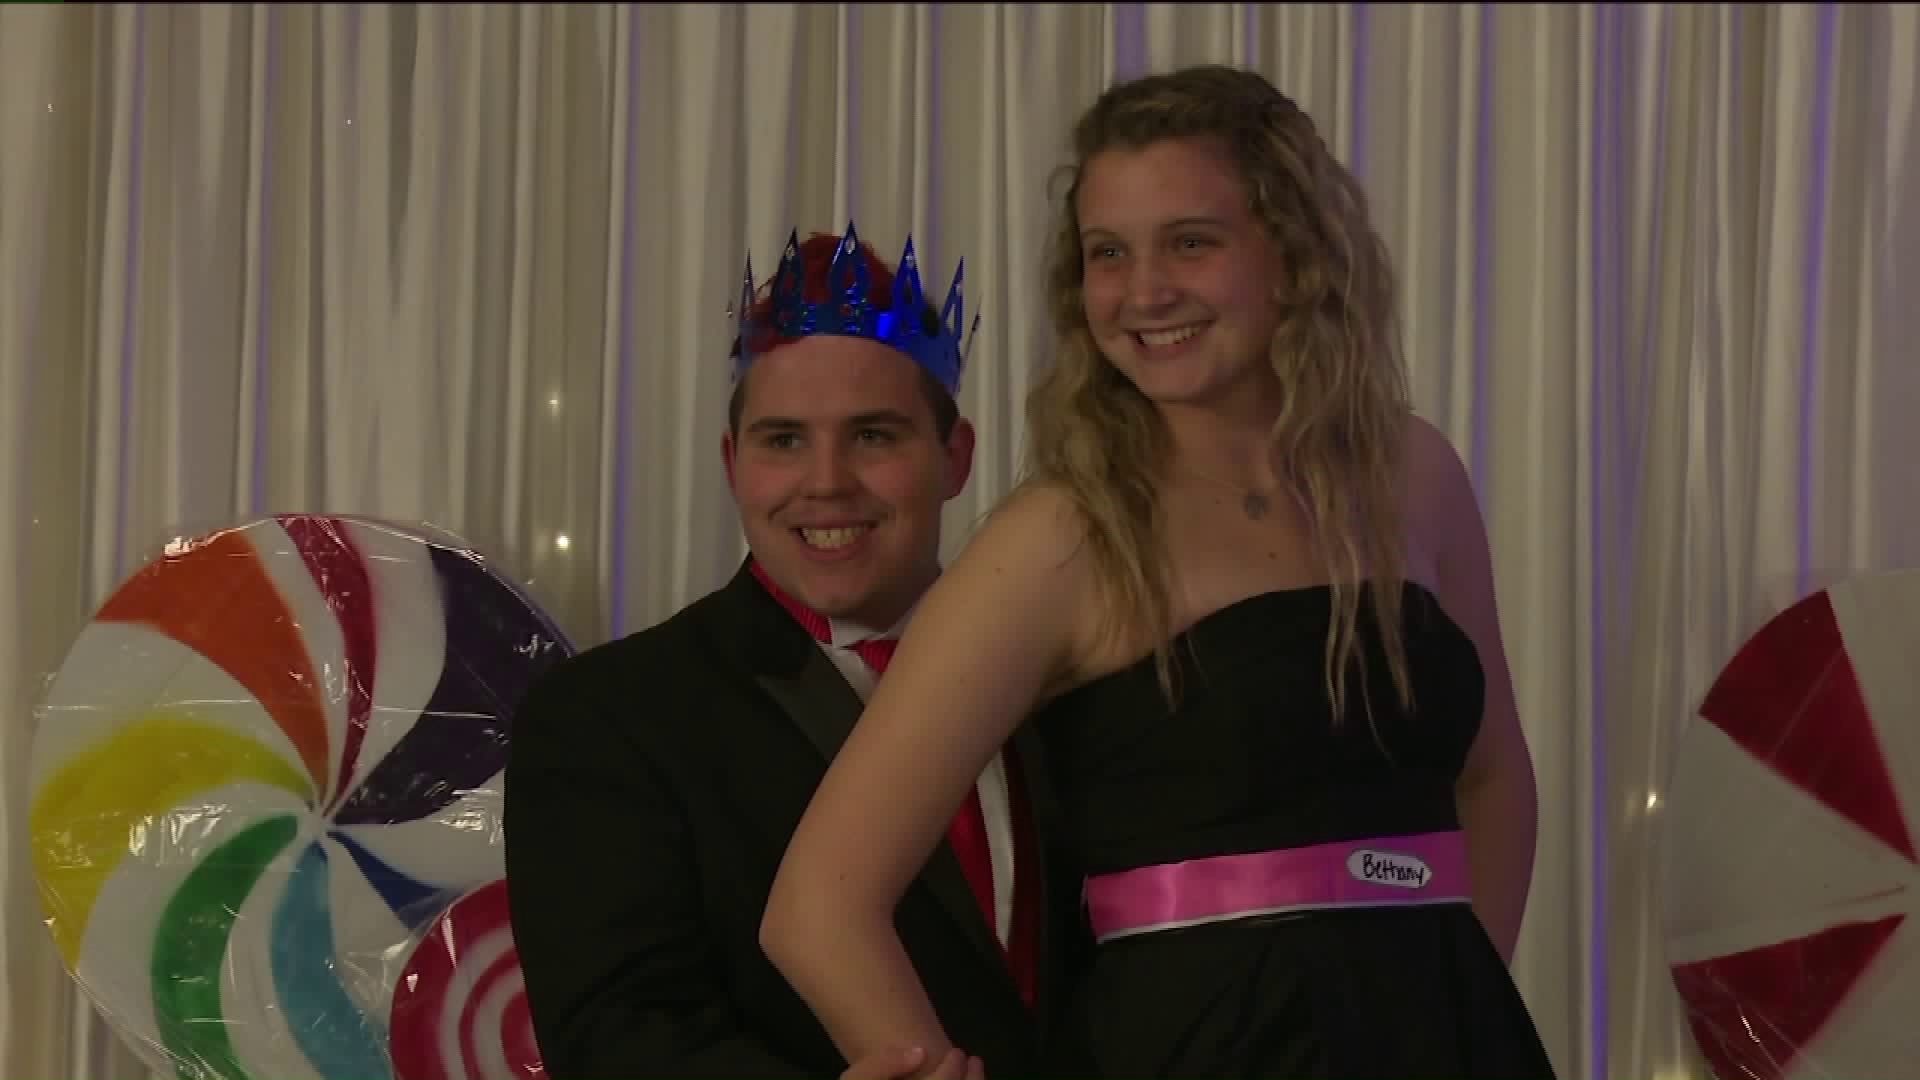 Students Organize Prom for Peers with Special Needs